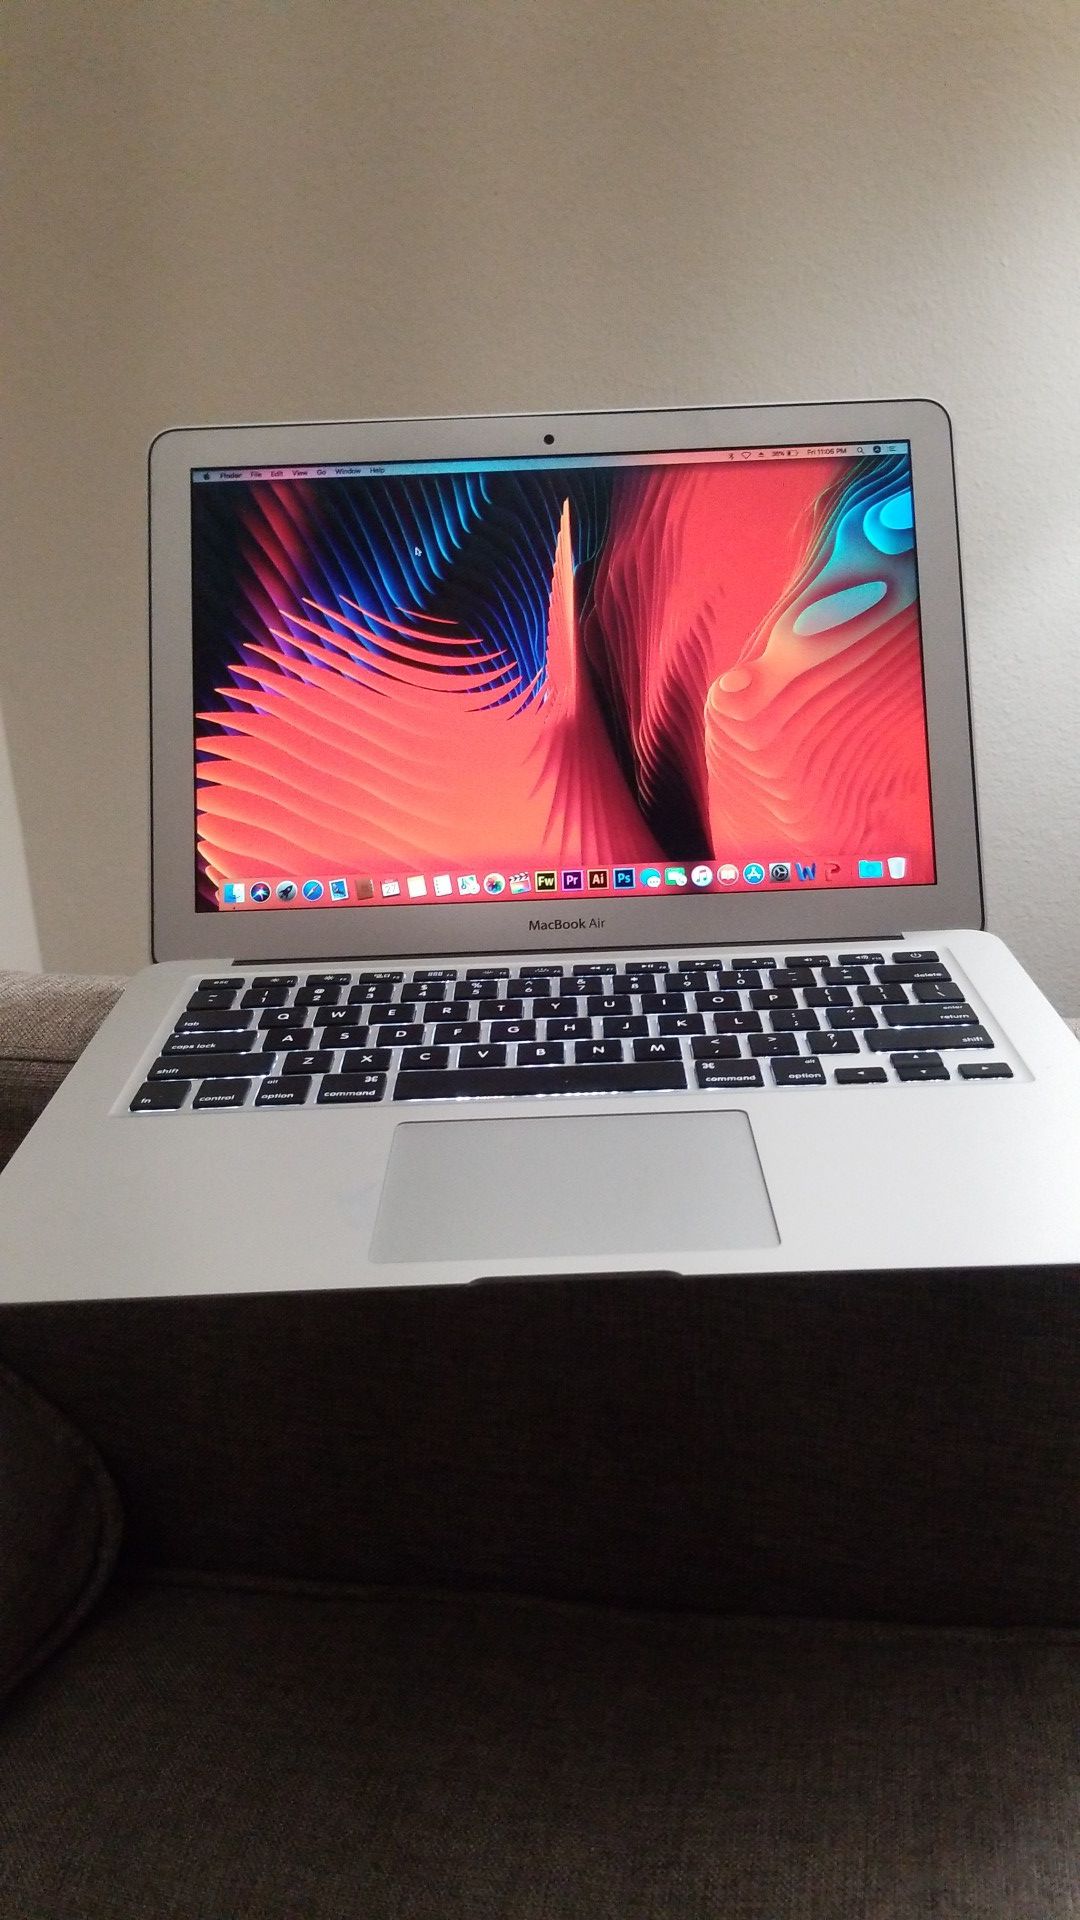 2015 macbook Air like new comes with box